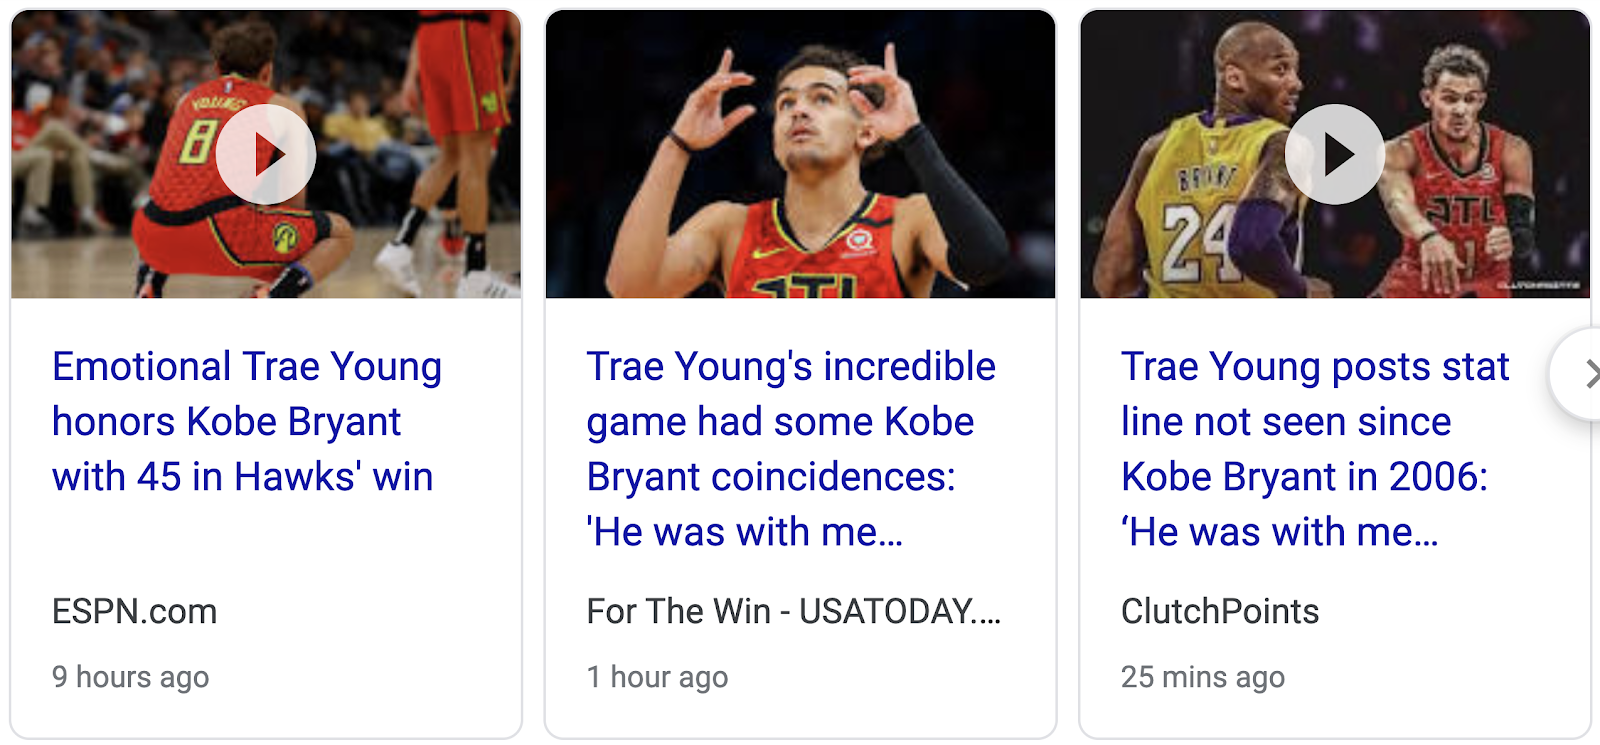 Trae Young's last conversation with Kobe Bryant — “That's one of